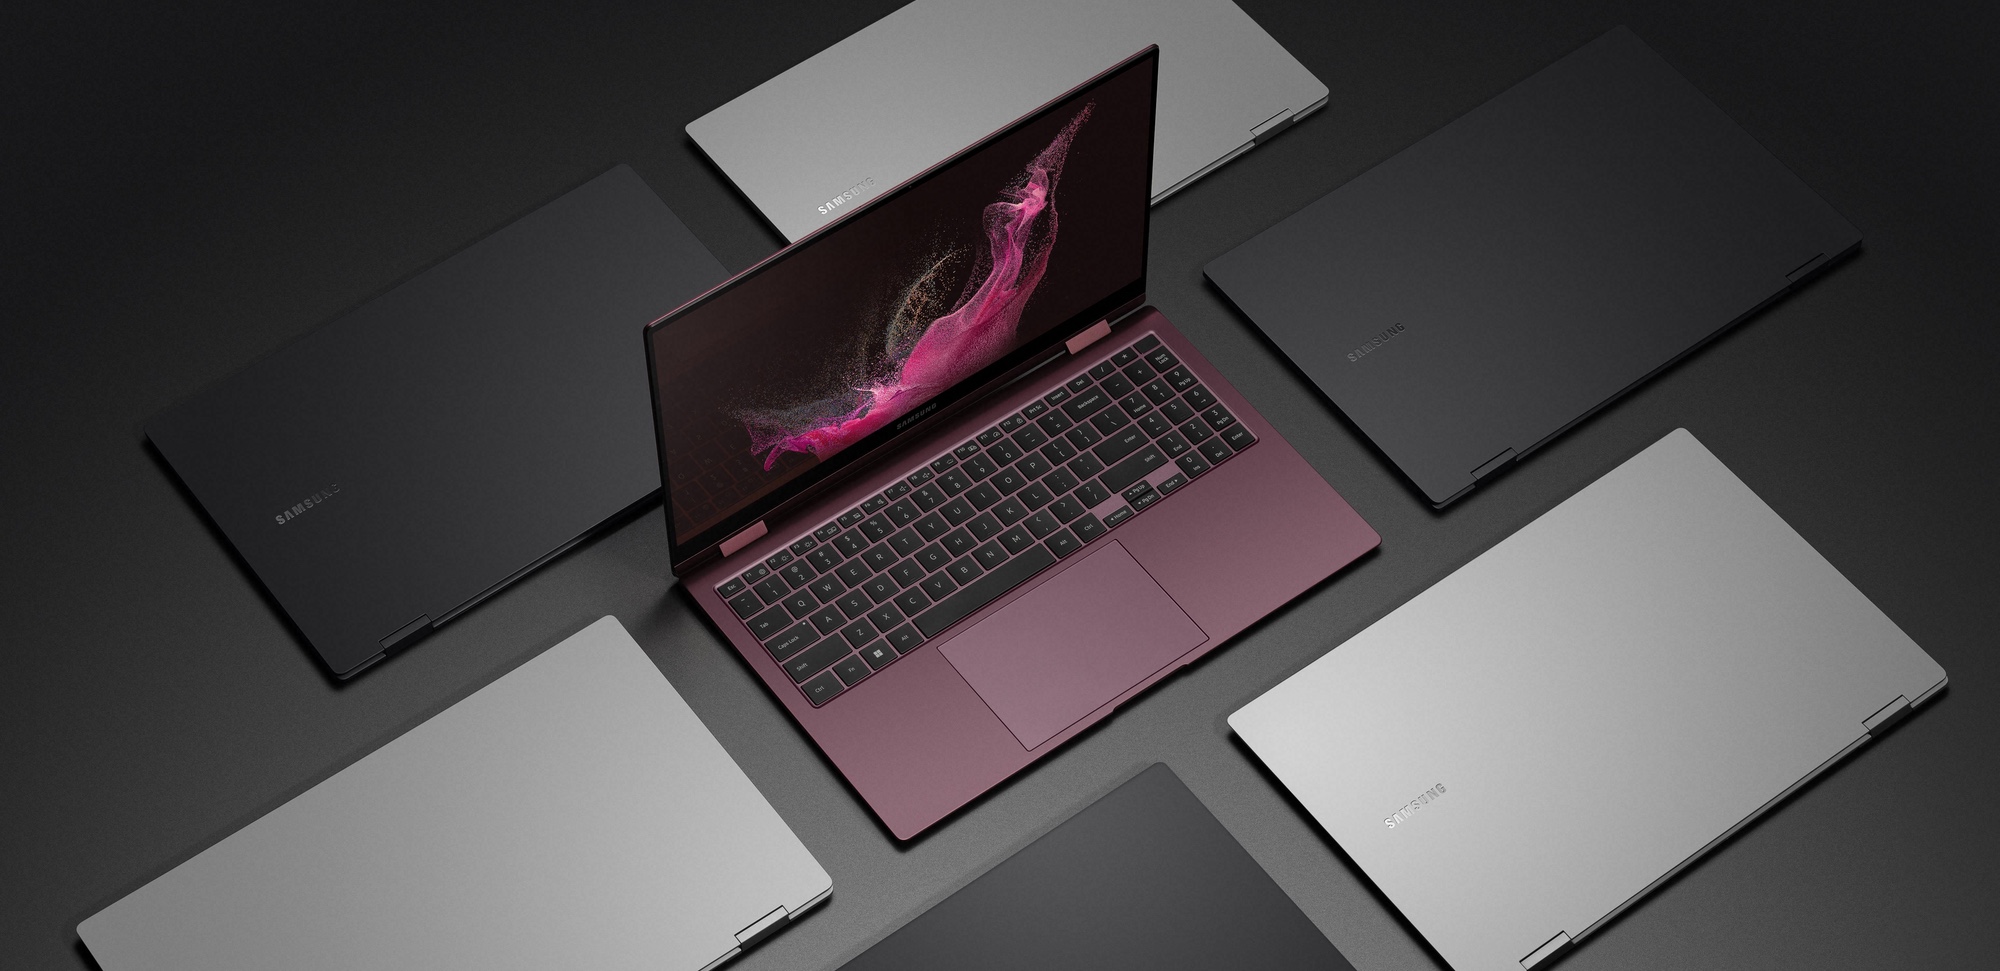 Galaxy Book 2 Pro renders courtesy of 91Mobiles